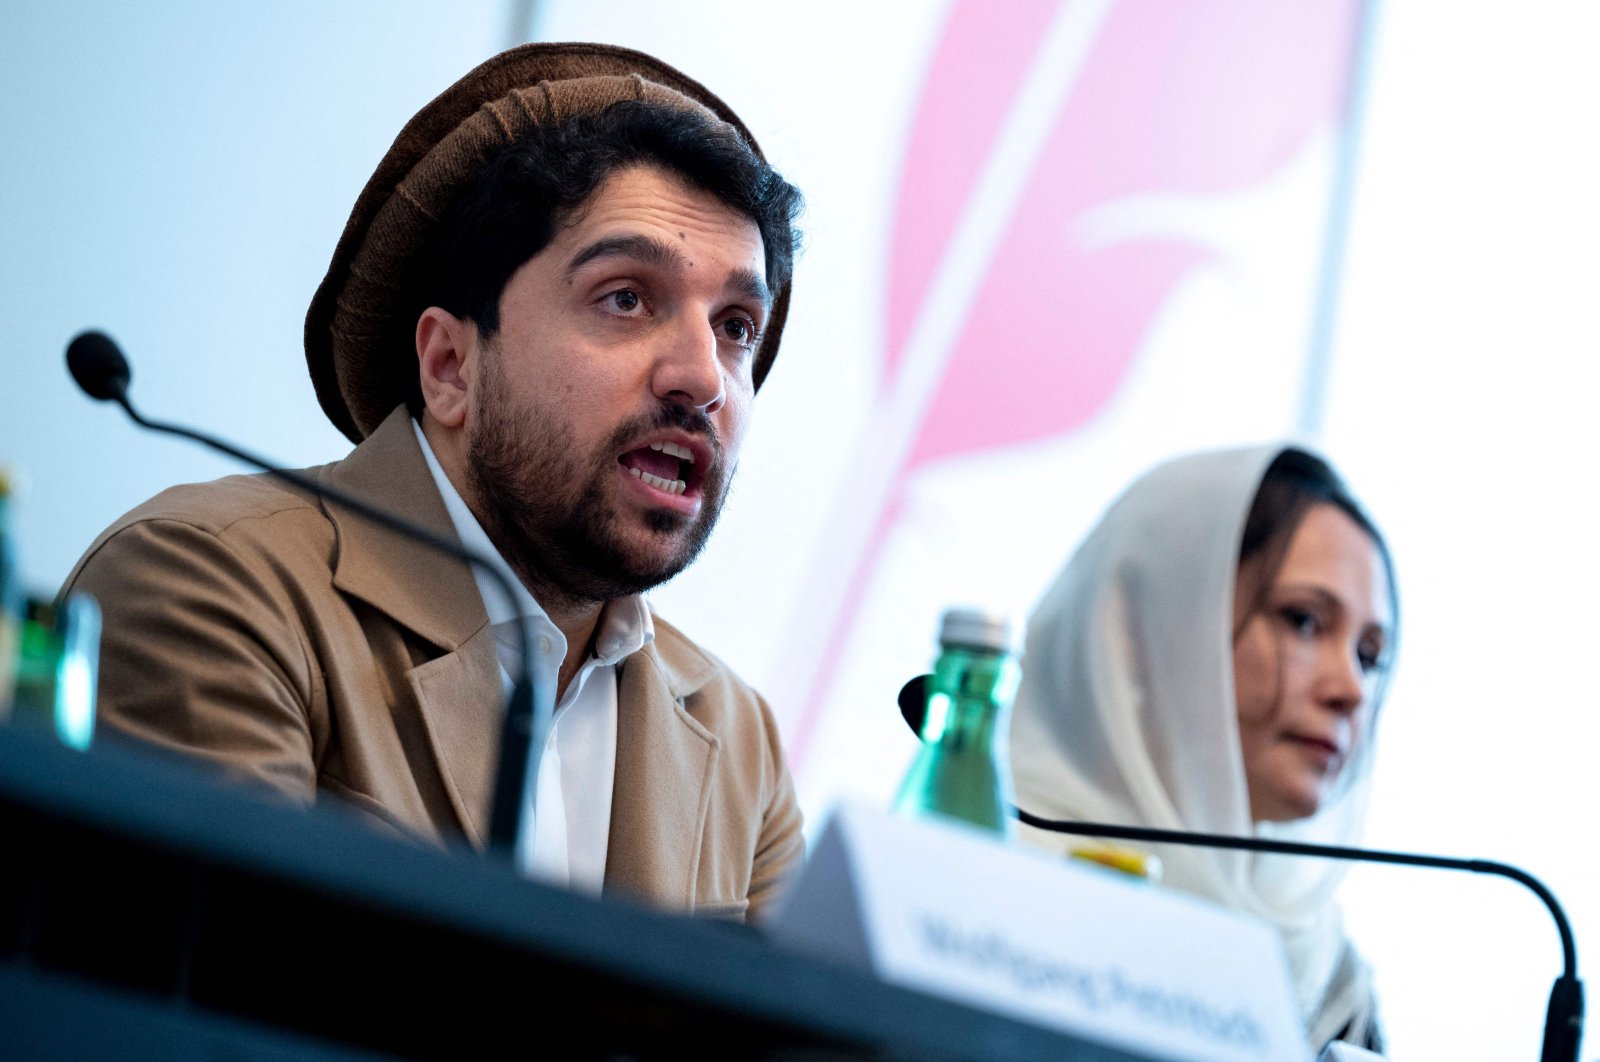 Ahmad Massoud (L), leader of the National Resistance Front of Afghanistan and Aliya Yilmaz, Afghan women&#039;s rights activist, speak to journalists at the intra-Afghanistan conference, Vienna, Austria, Sept. 16, 2022. (AFP Photo)